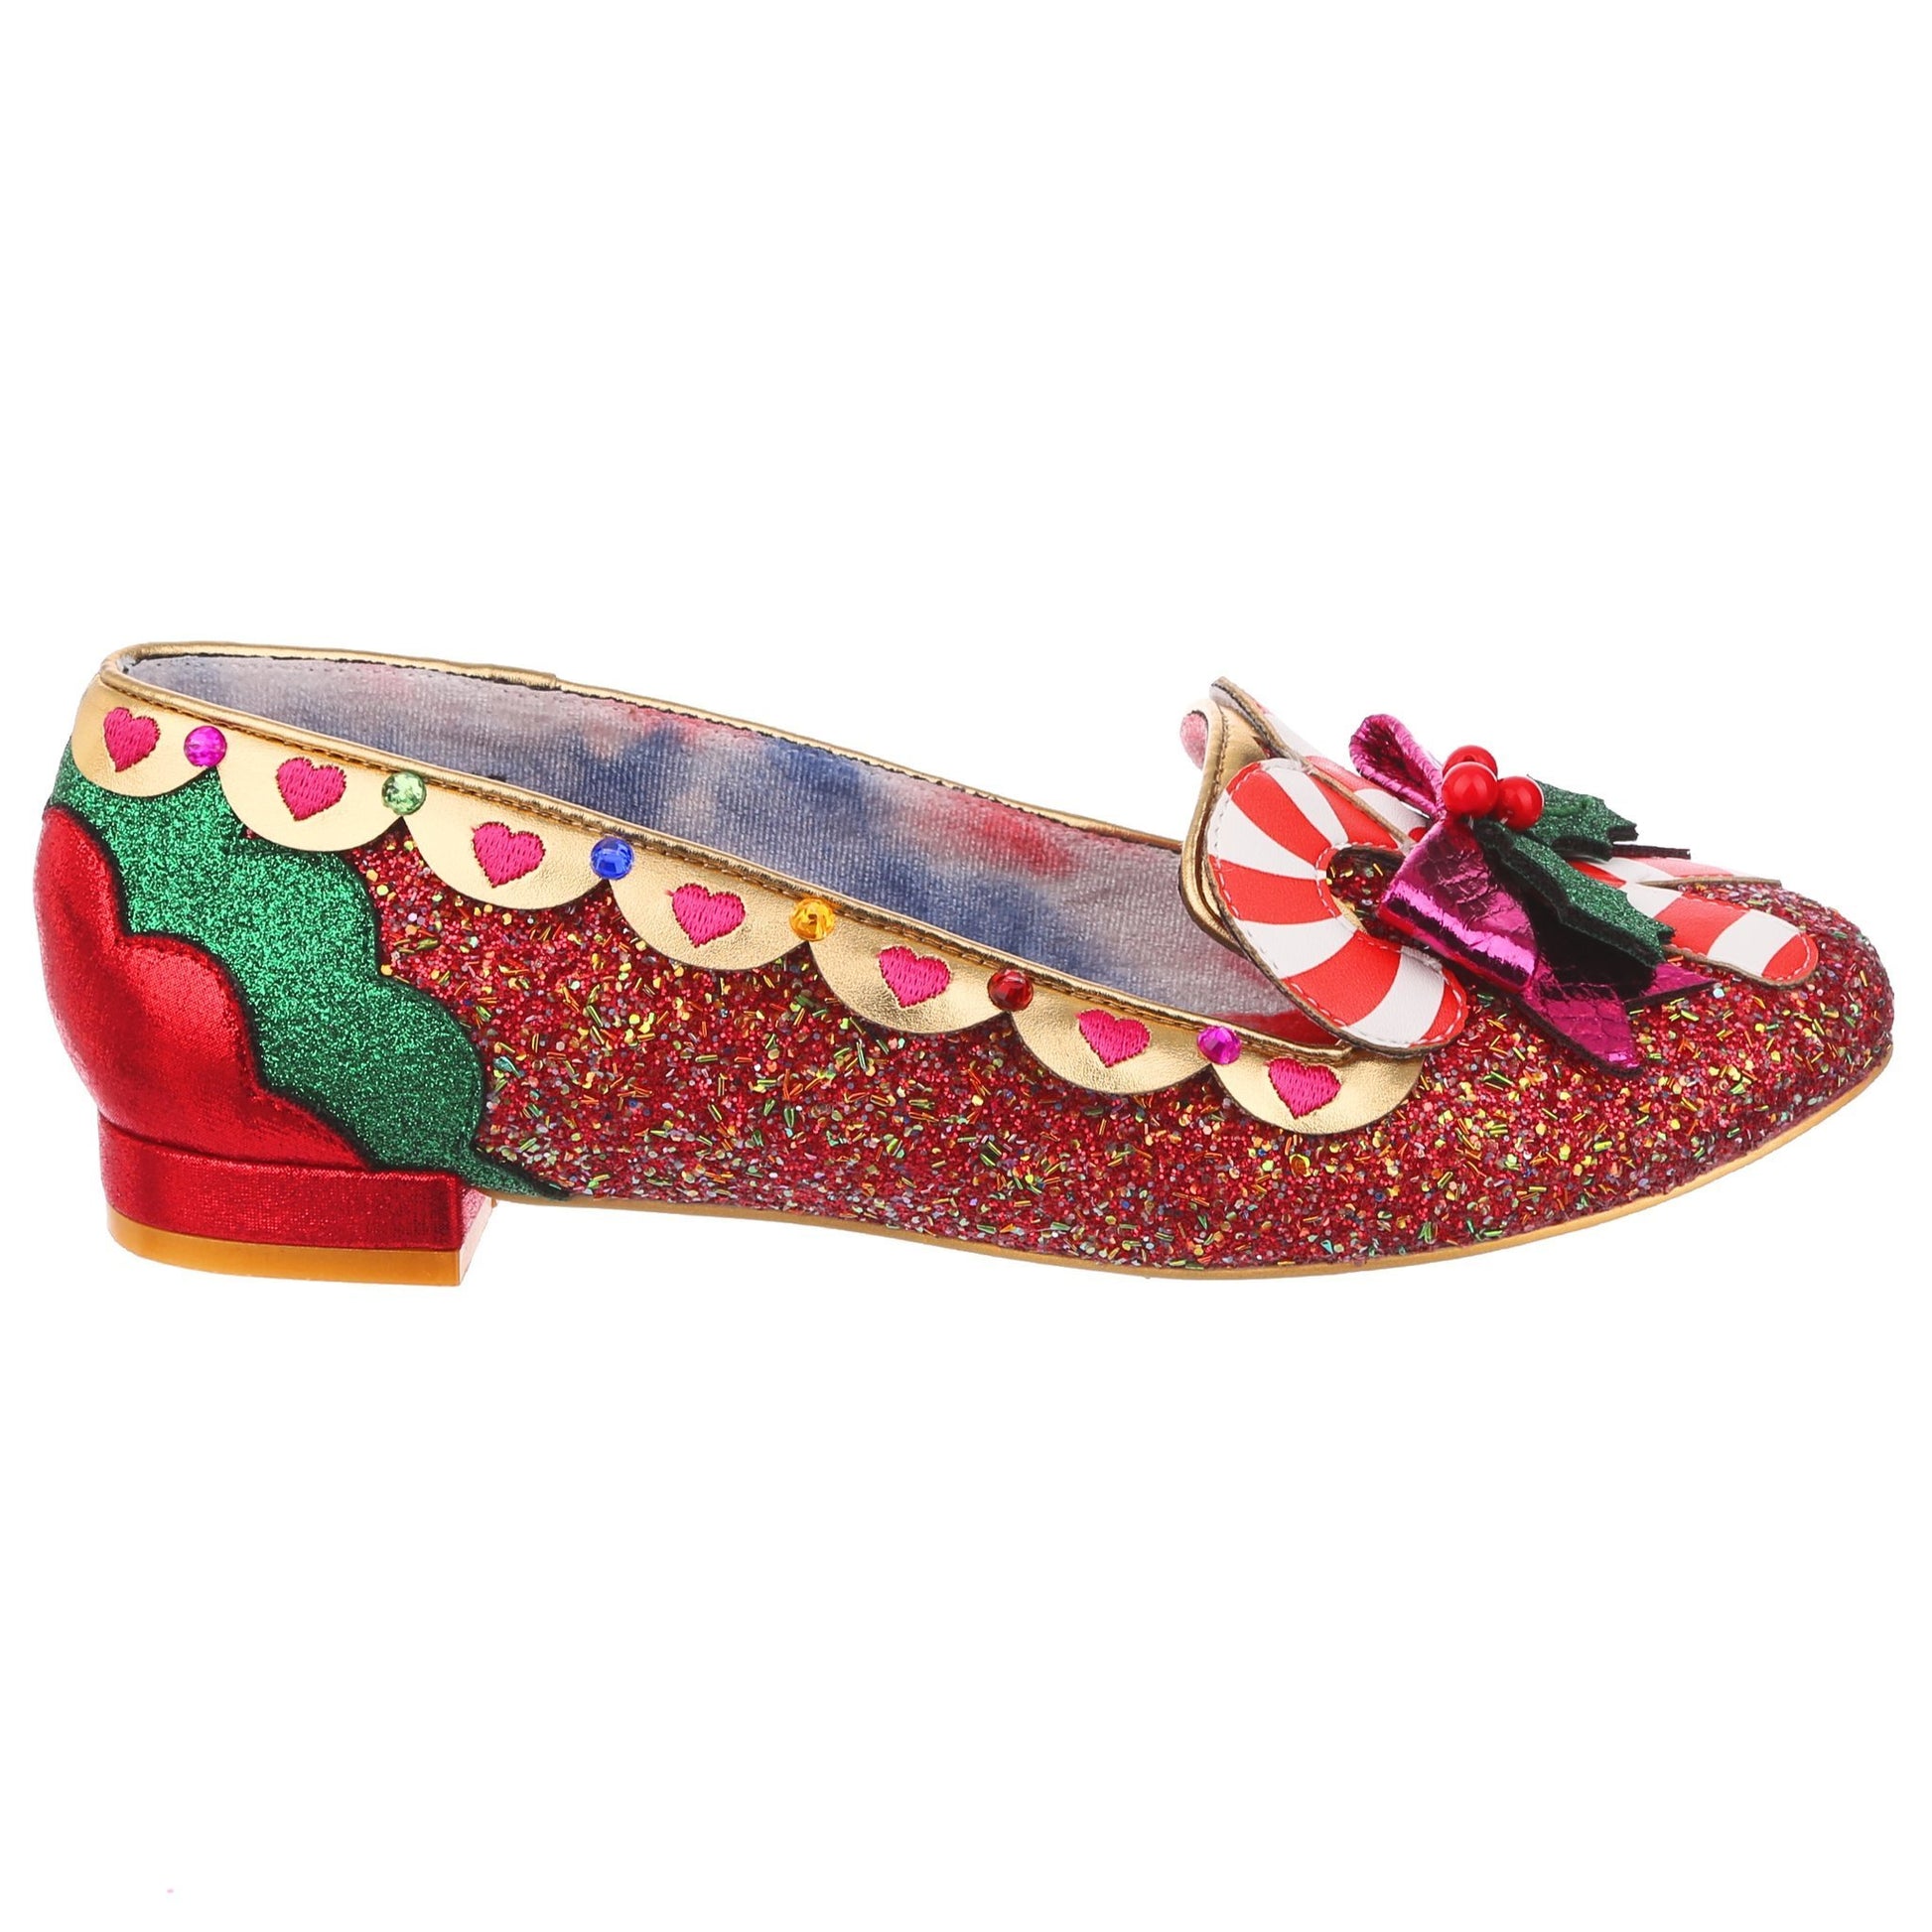 Yule Love This - Rockamilly-Shoes-Vintage